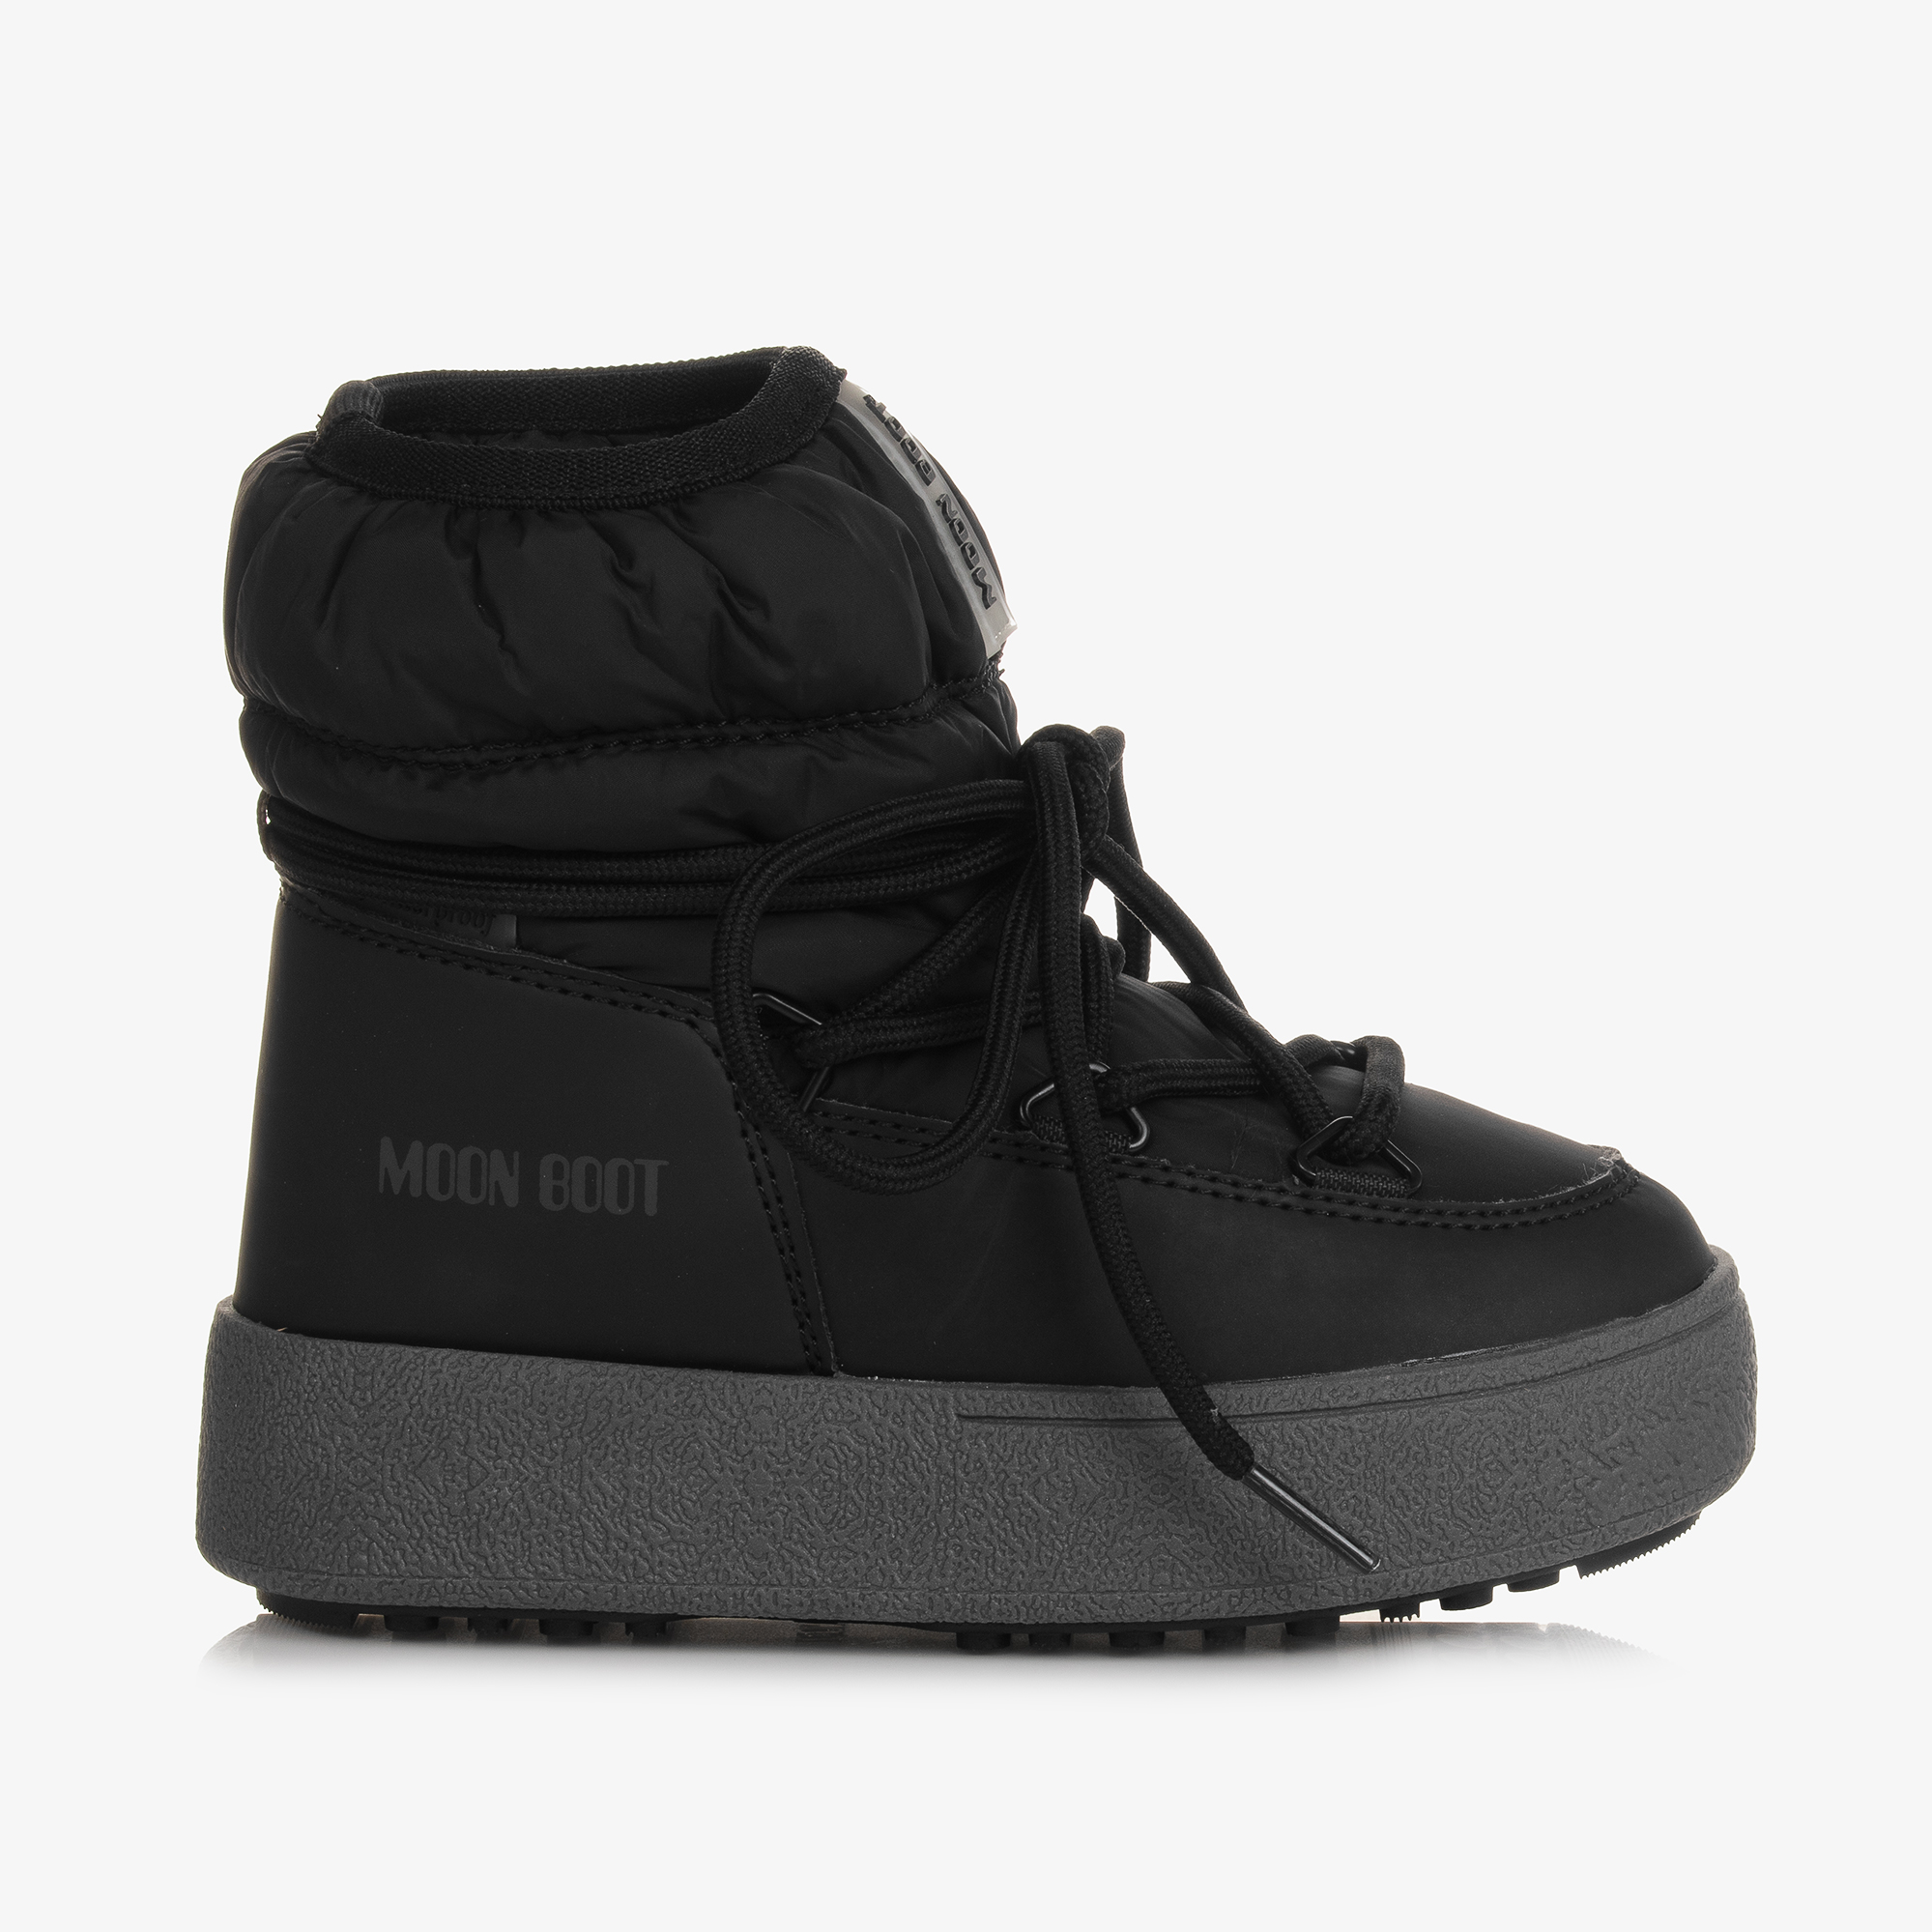 Moon Boot - Black Low Lace-Up Boots